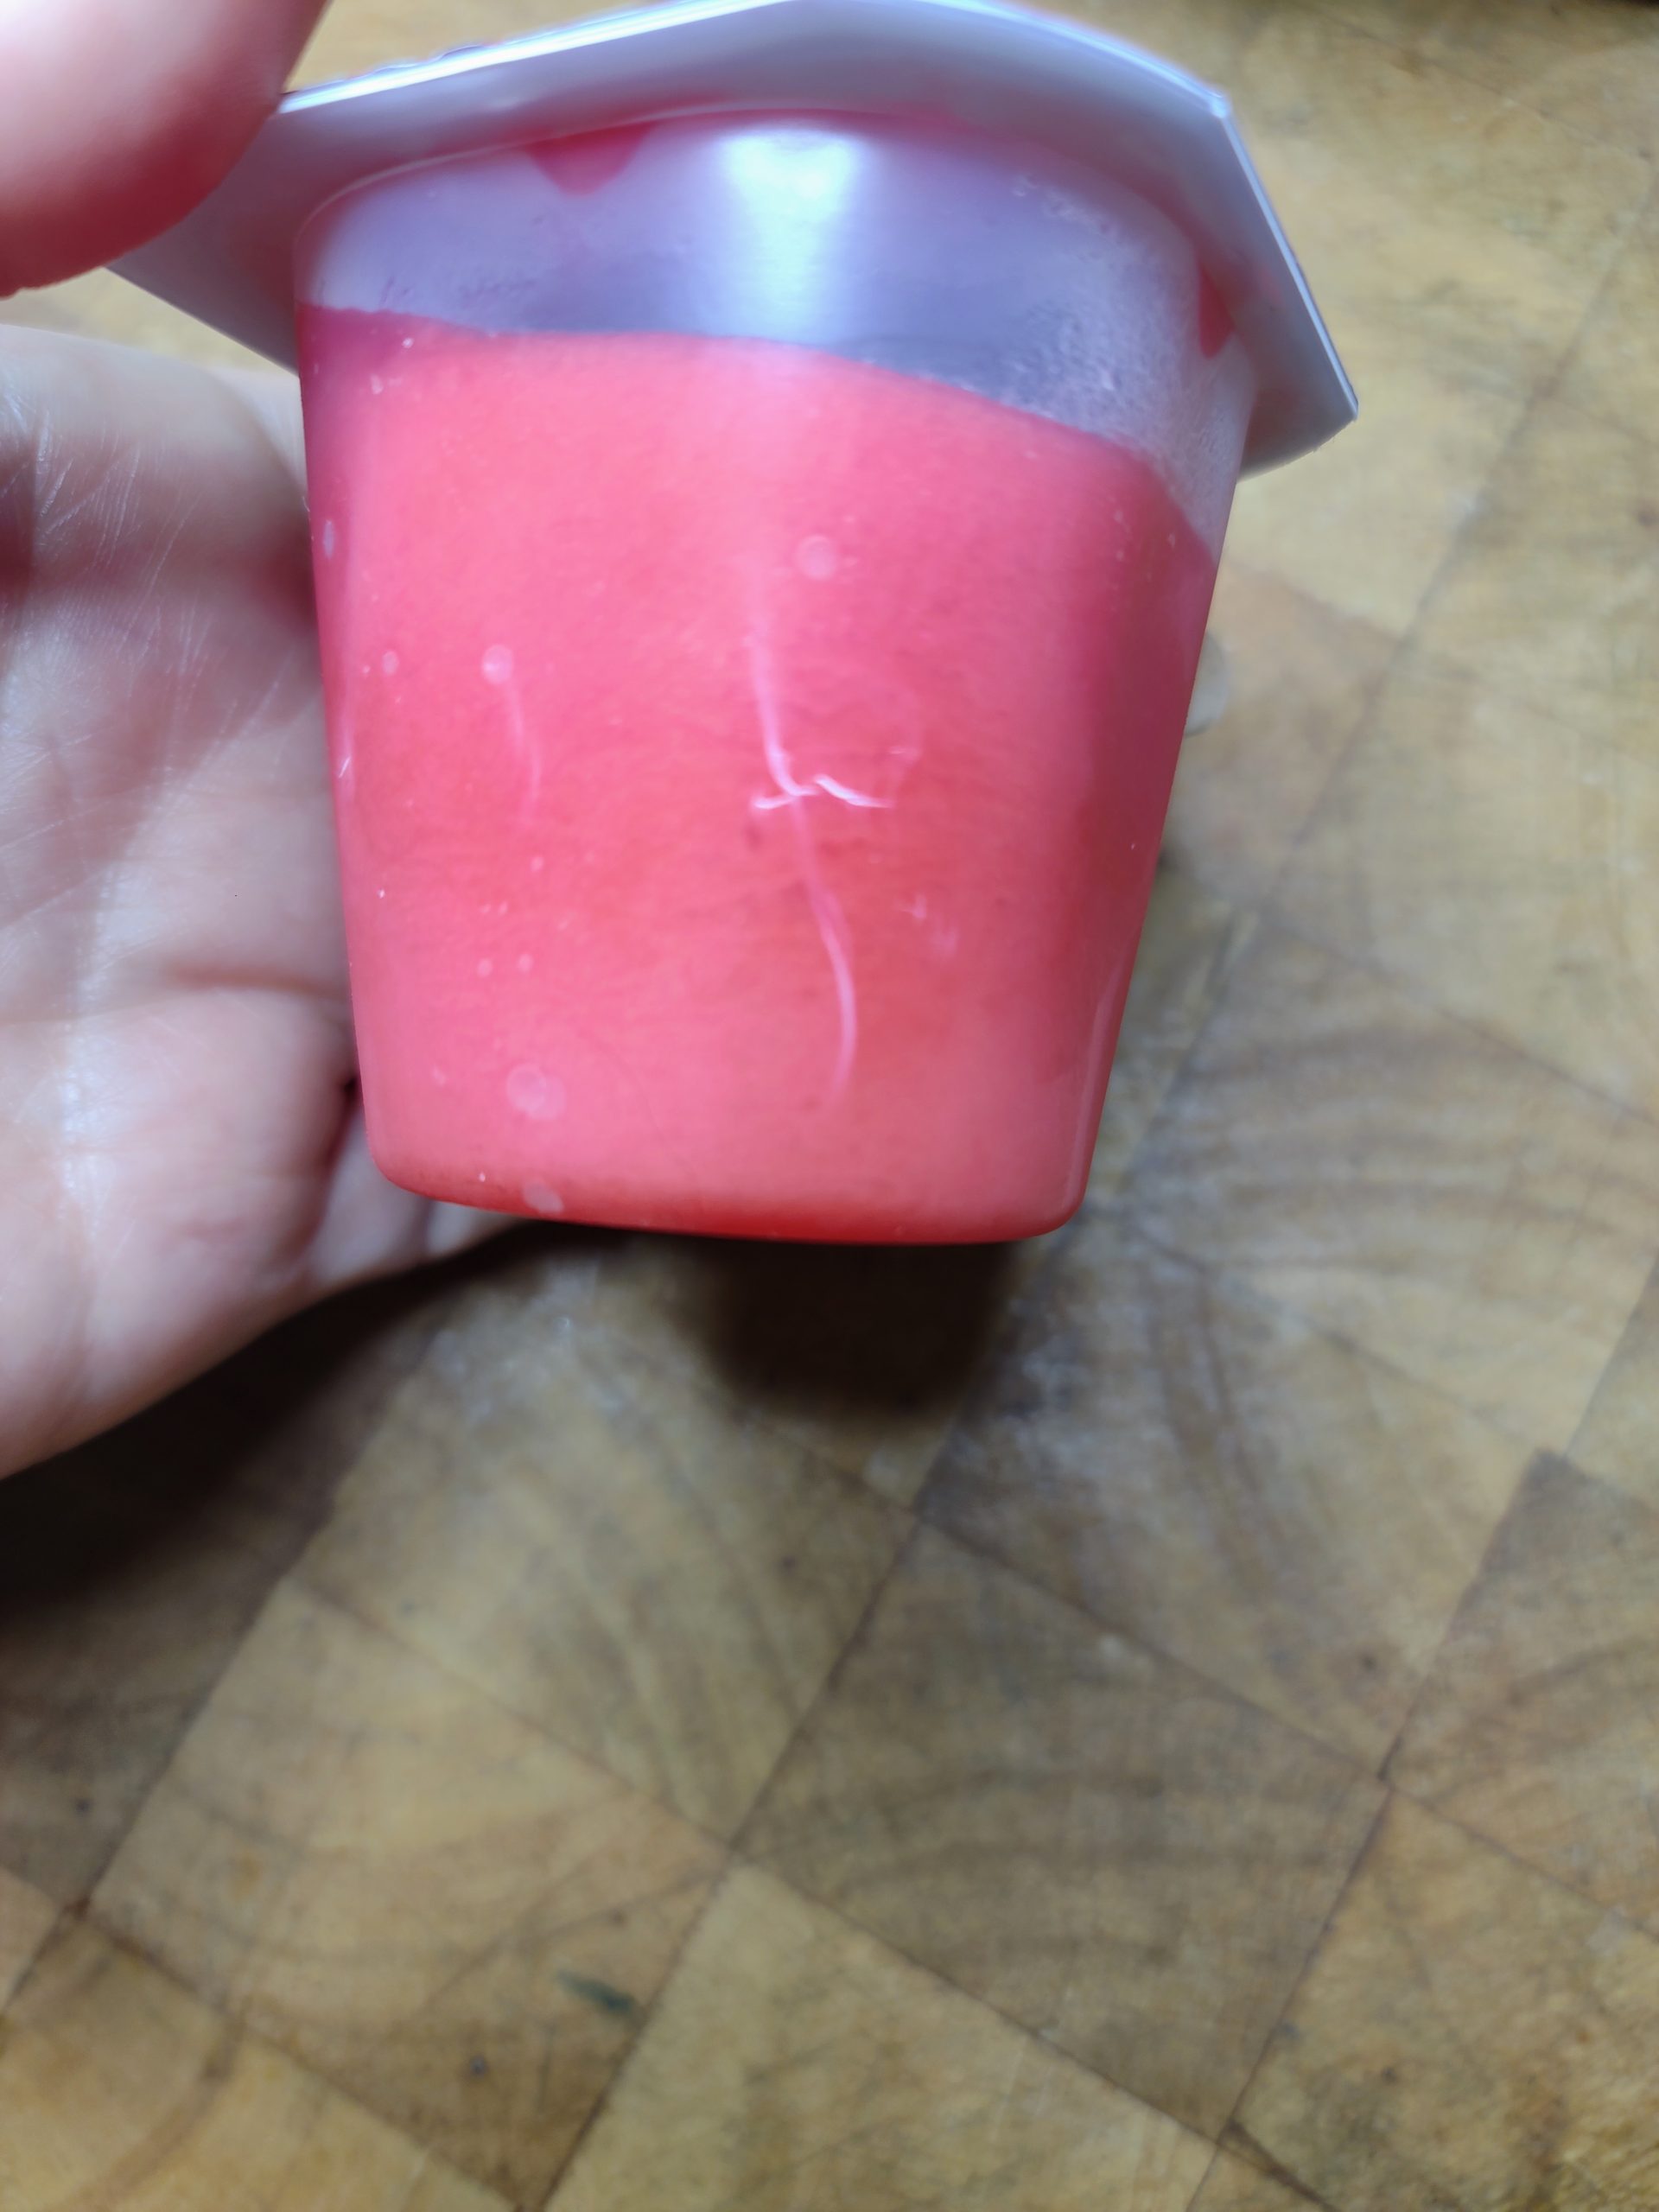 jello frozen in store container that has crack in the container